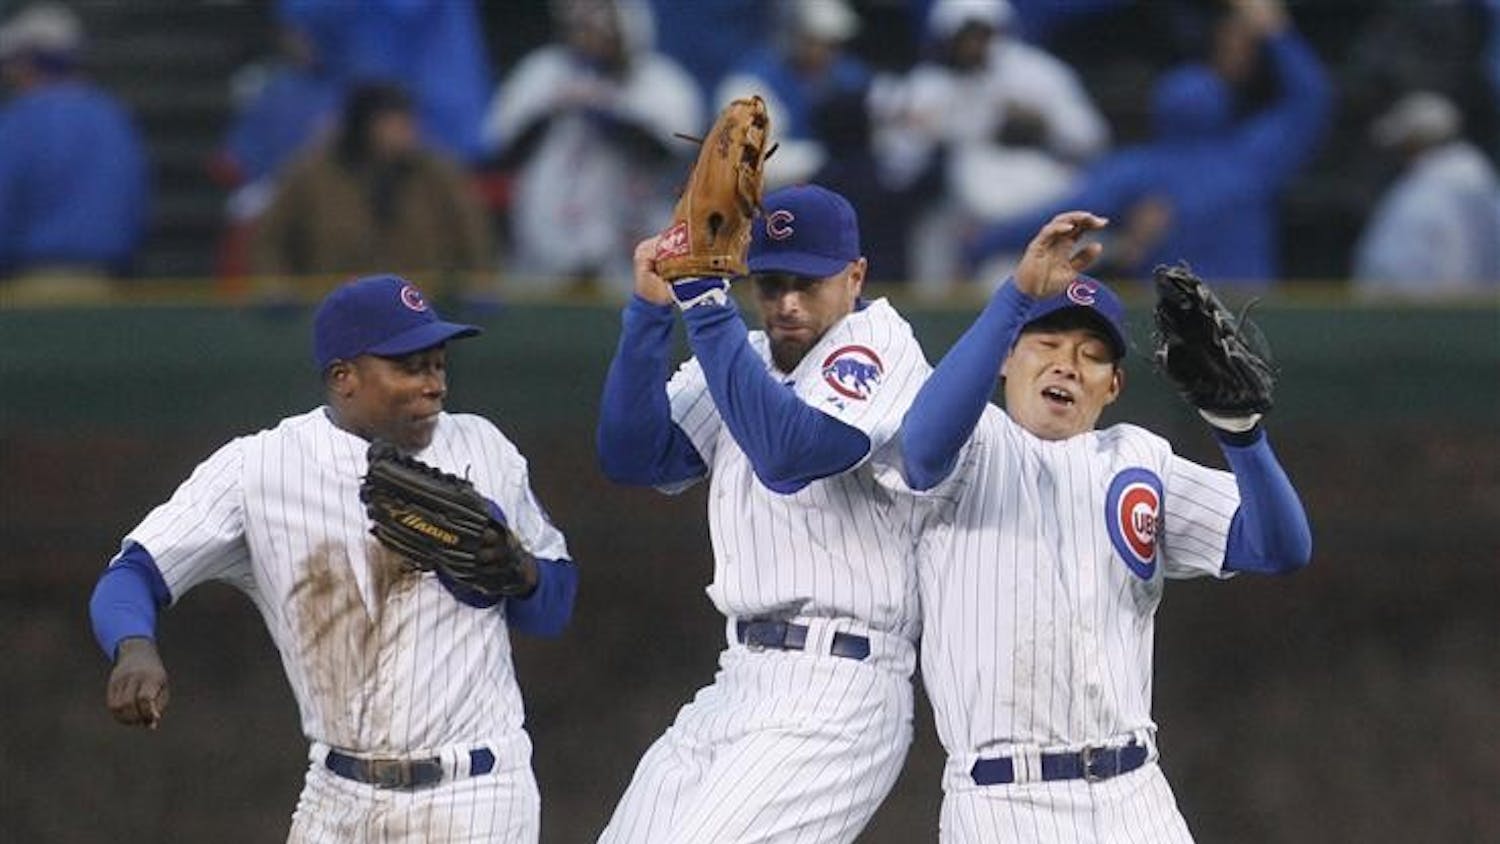 Chicago Cubs outfielders Alfonso Soriano, Reed Johnson, and Kosuke Fukudome celebrate the Cubs' 4-0 win over the Colorado Rockies after a baseball game at Wrigley Field Monday in Chicago. 